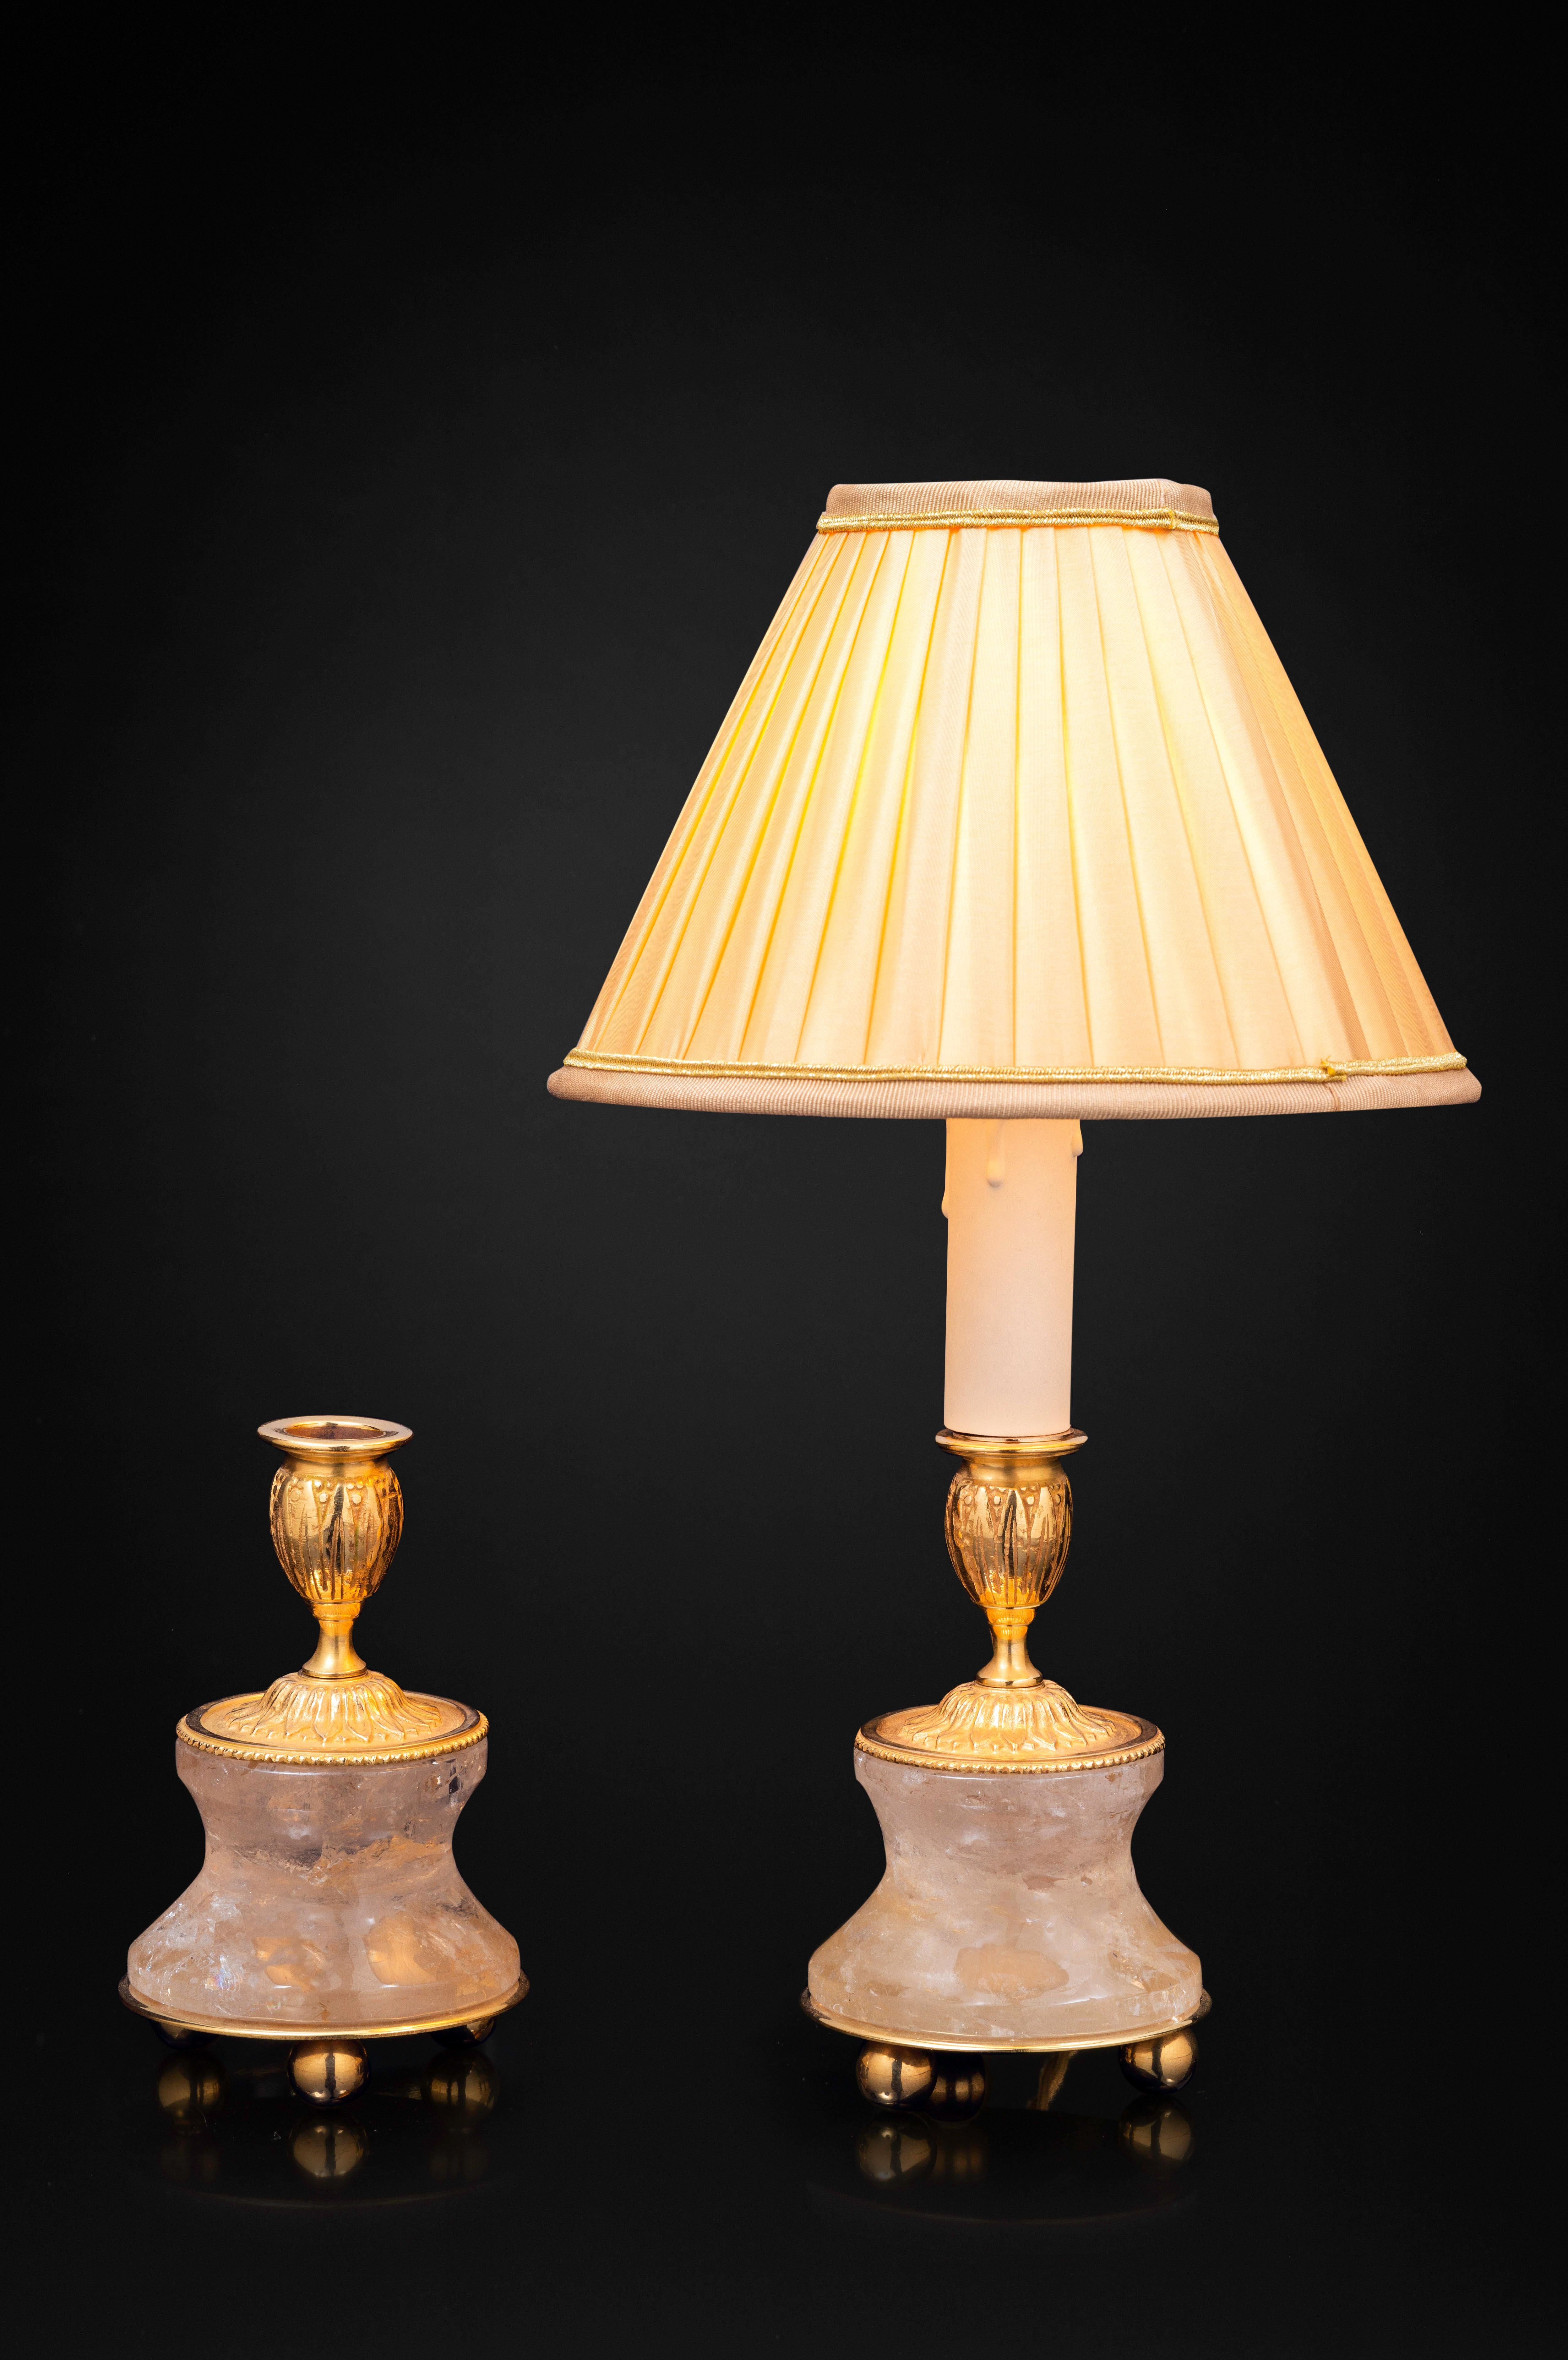 French Pair of Rock Crystal and Gilt-Bronze Lamps/Candlesticks Louis the XVI th Style